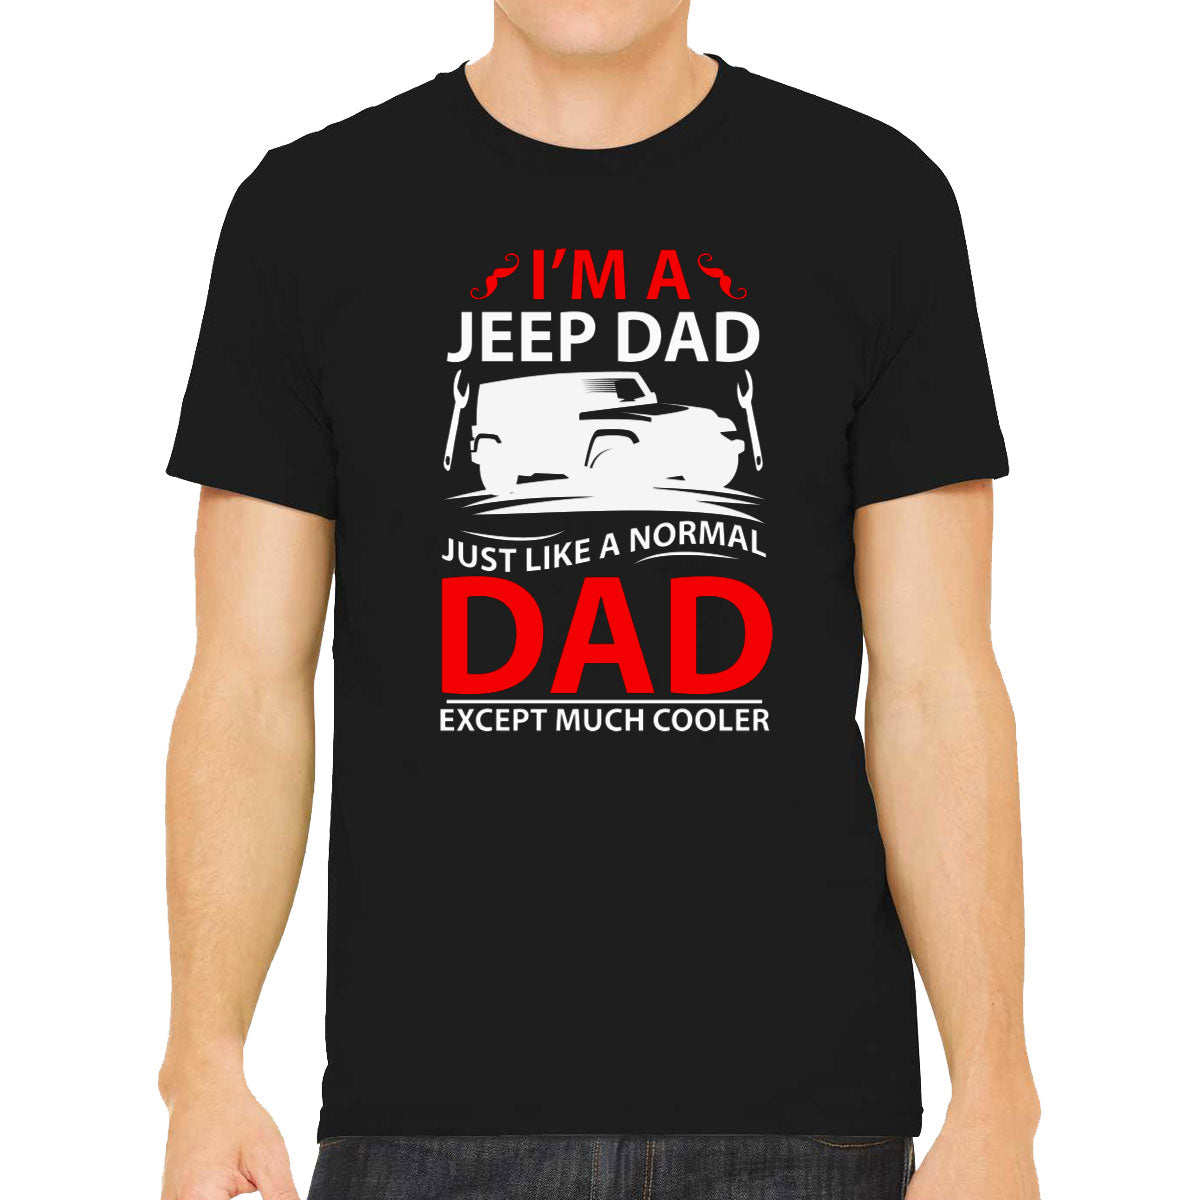 I'm A Jeep Dad Just Like A Normal Dad Except Much Cooler Men's T-shirt